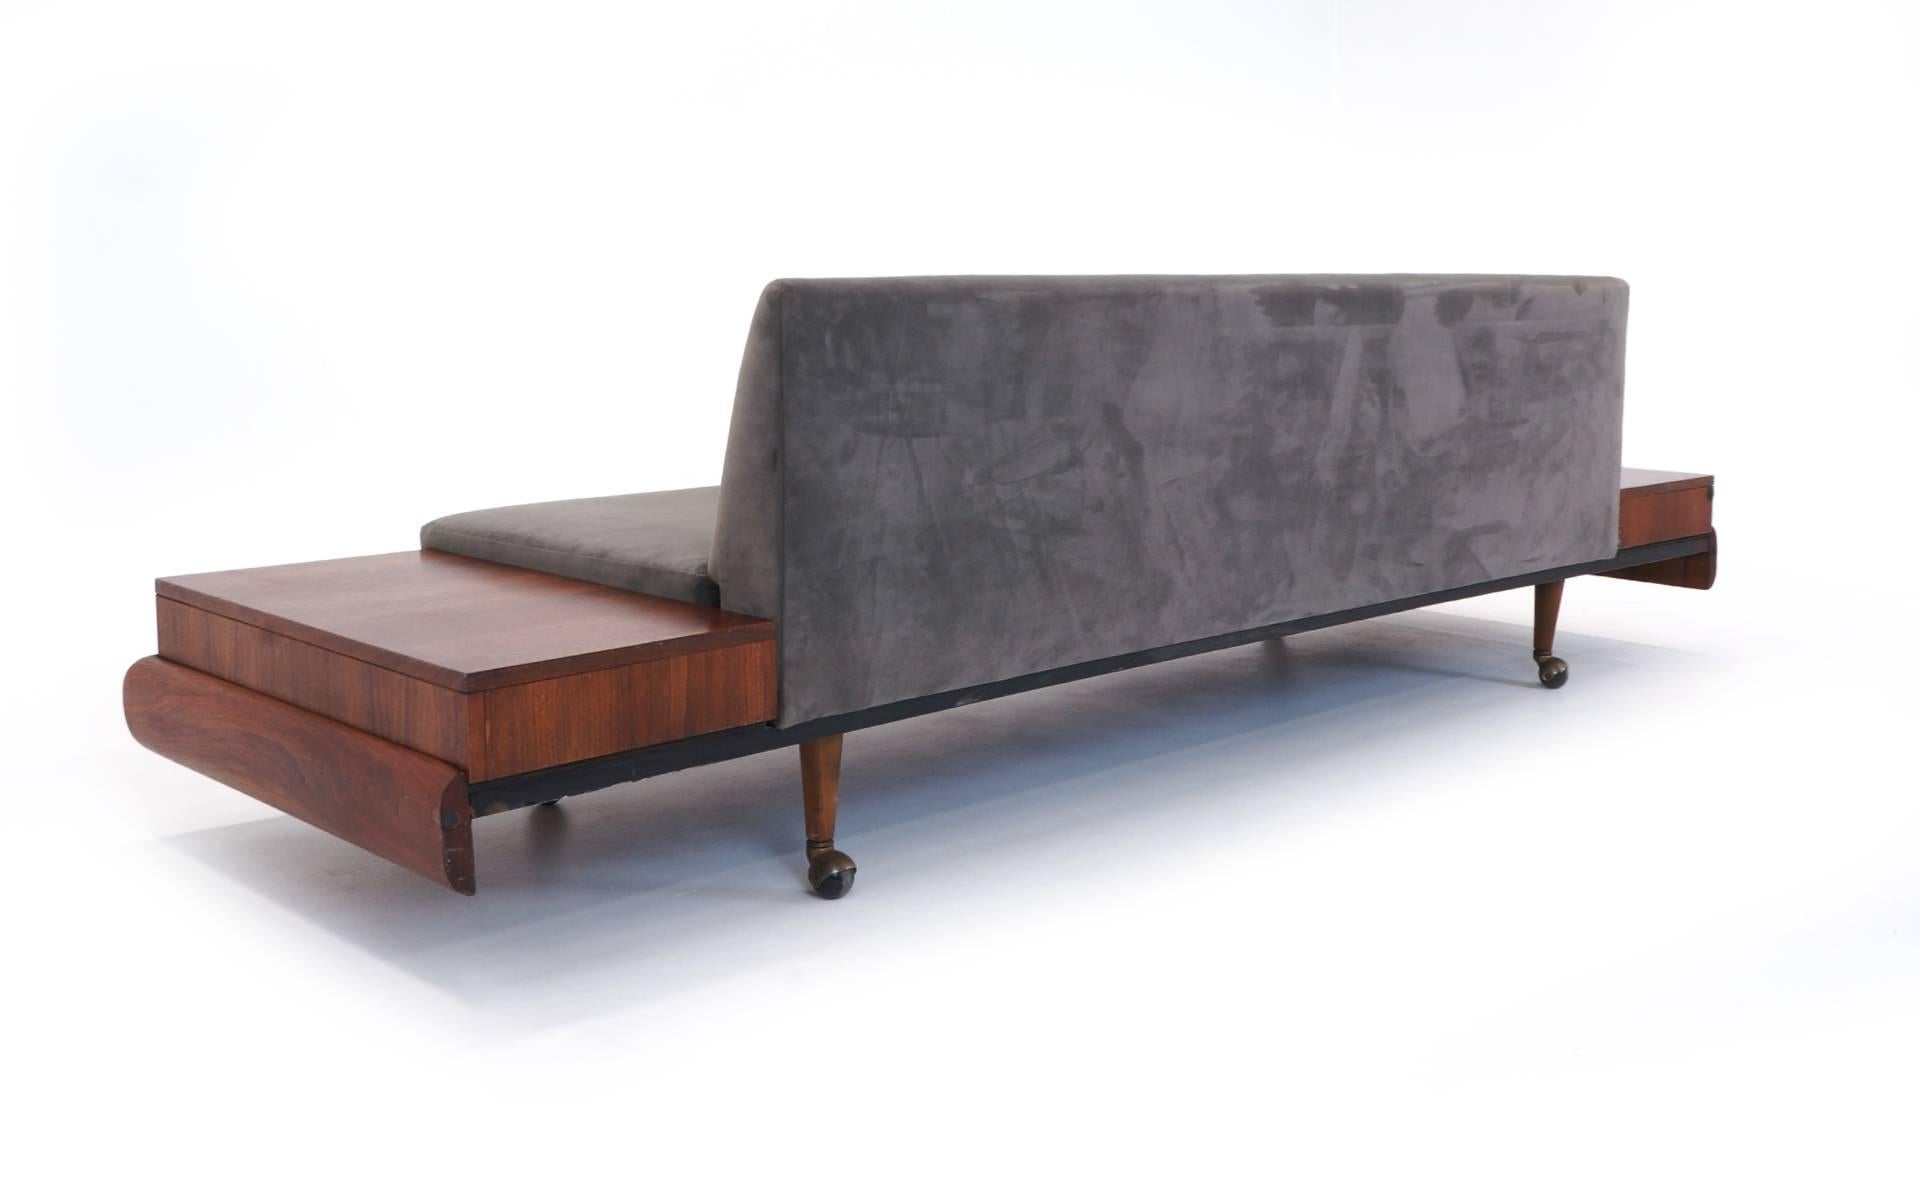 American Armless Sofa with Attached Tables by Adrian Pearsall for Craft Associates